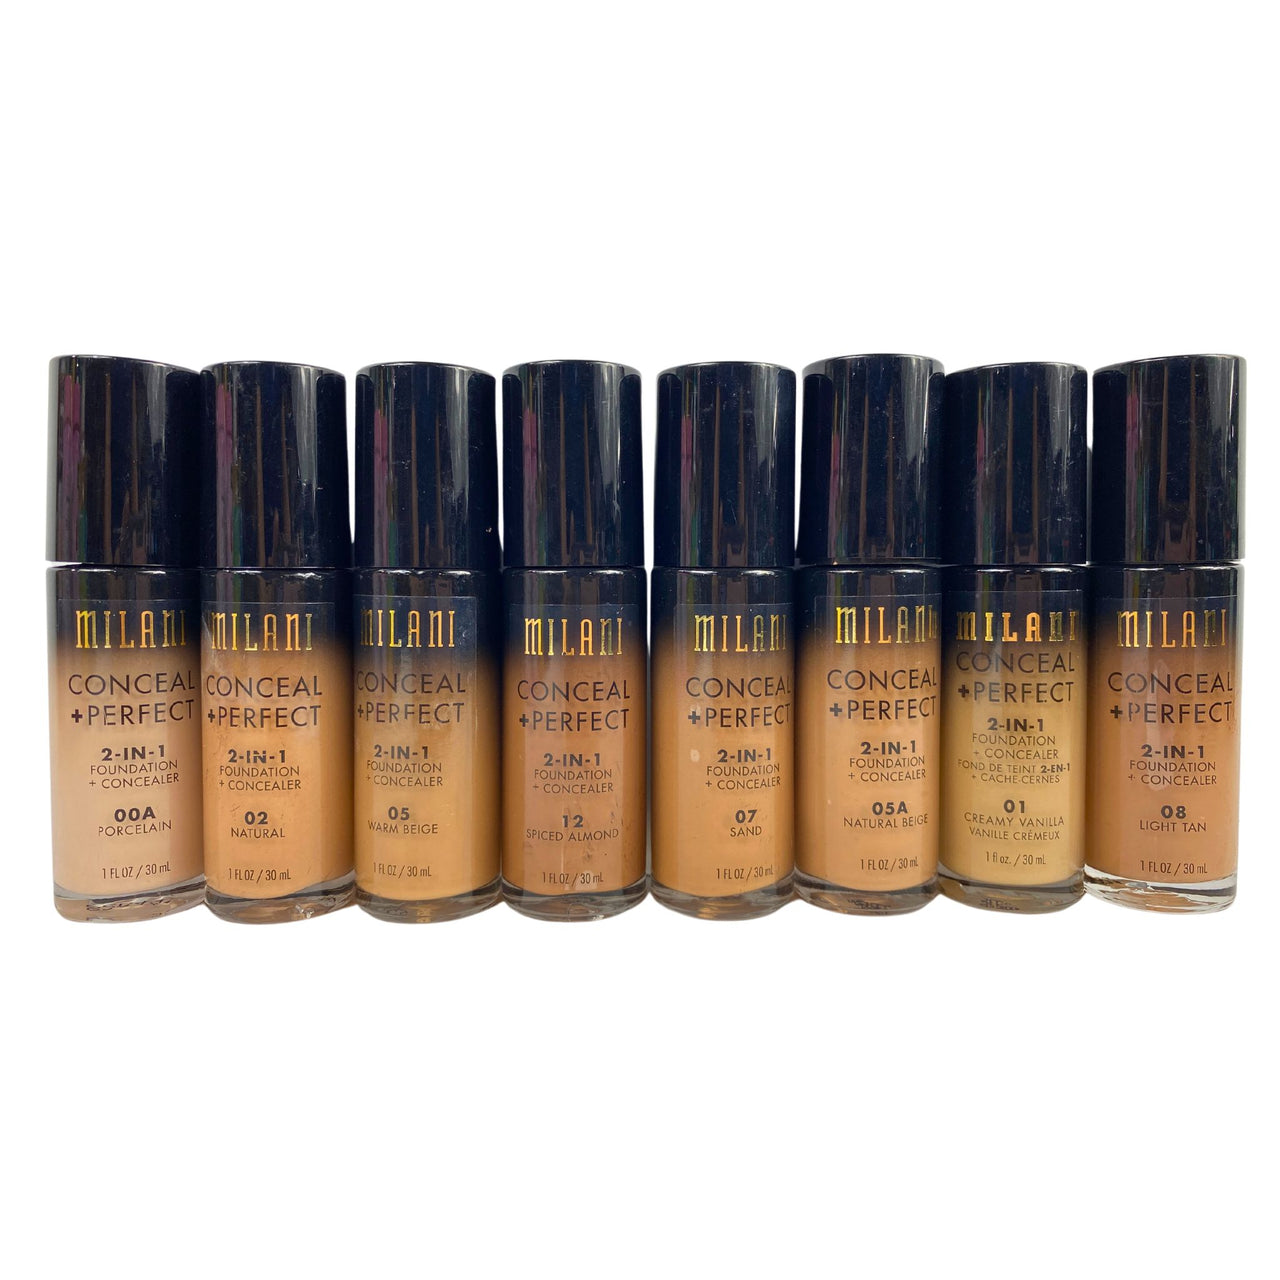 Milani Conceal + Perfect 2 - IN - 1 Foundation & Concealer 1OZ Assorted Mix